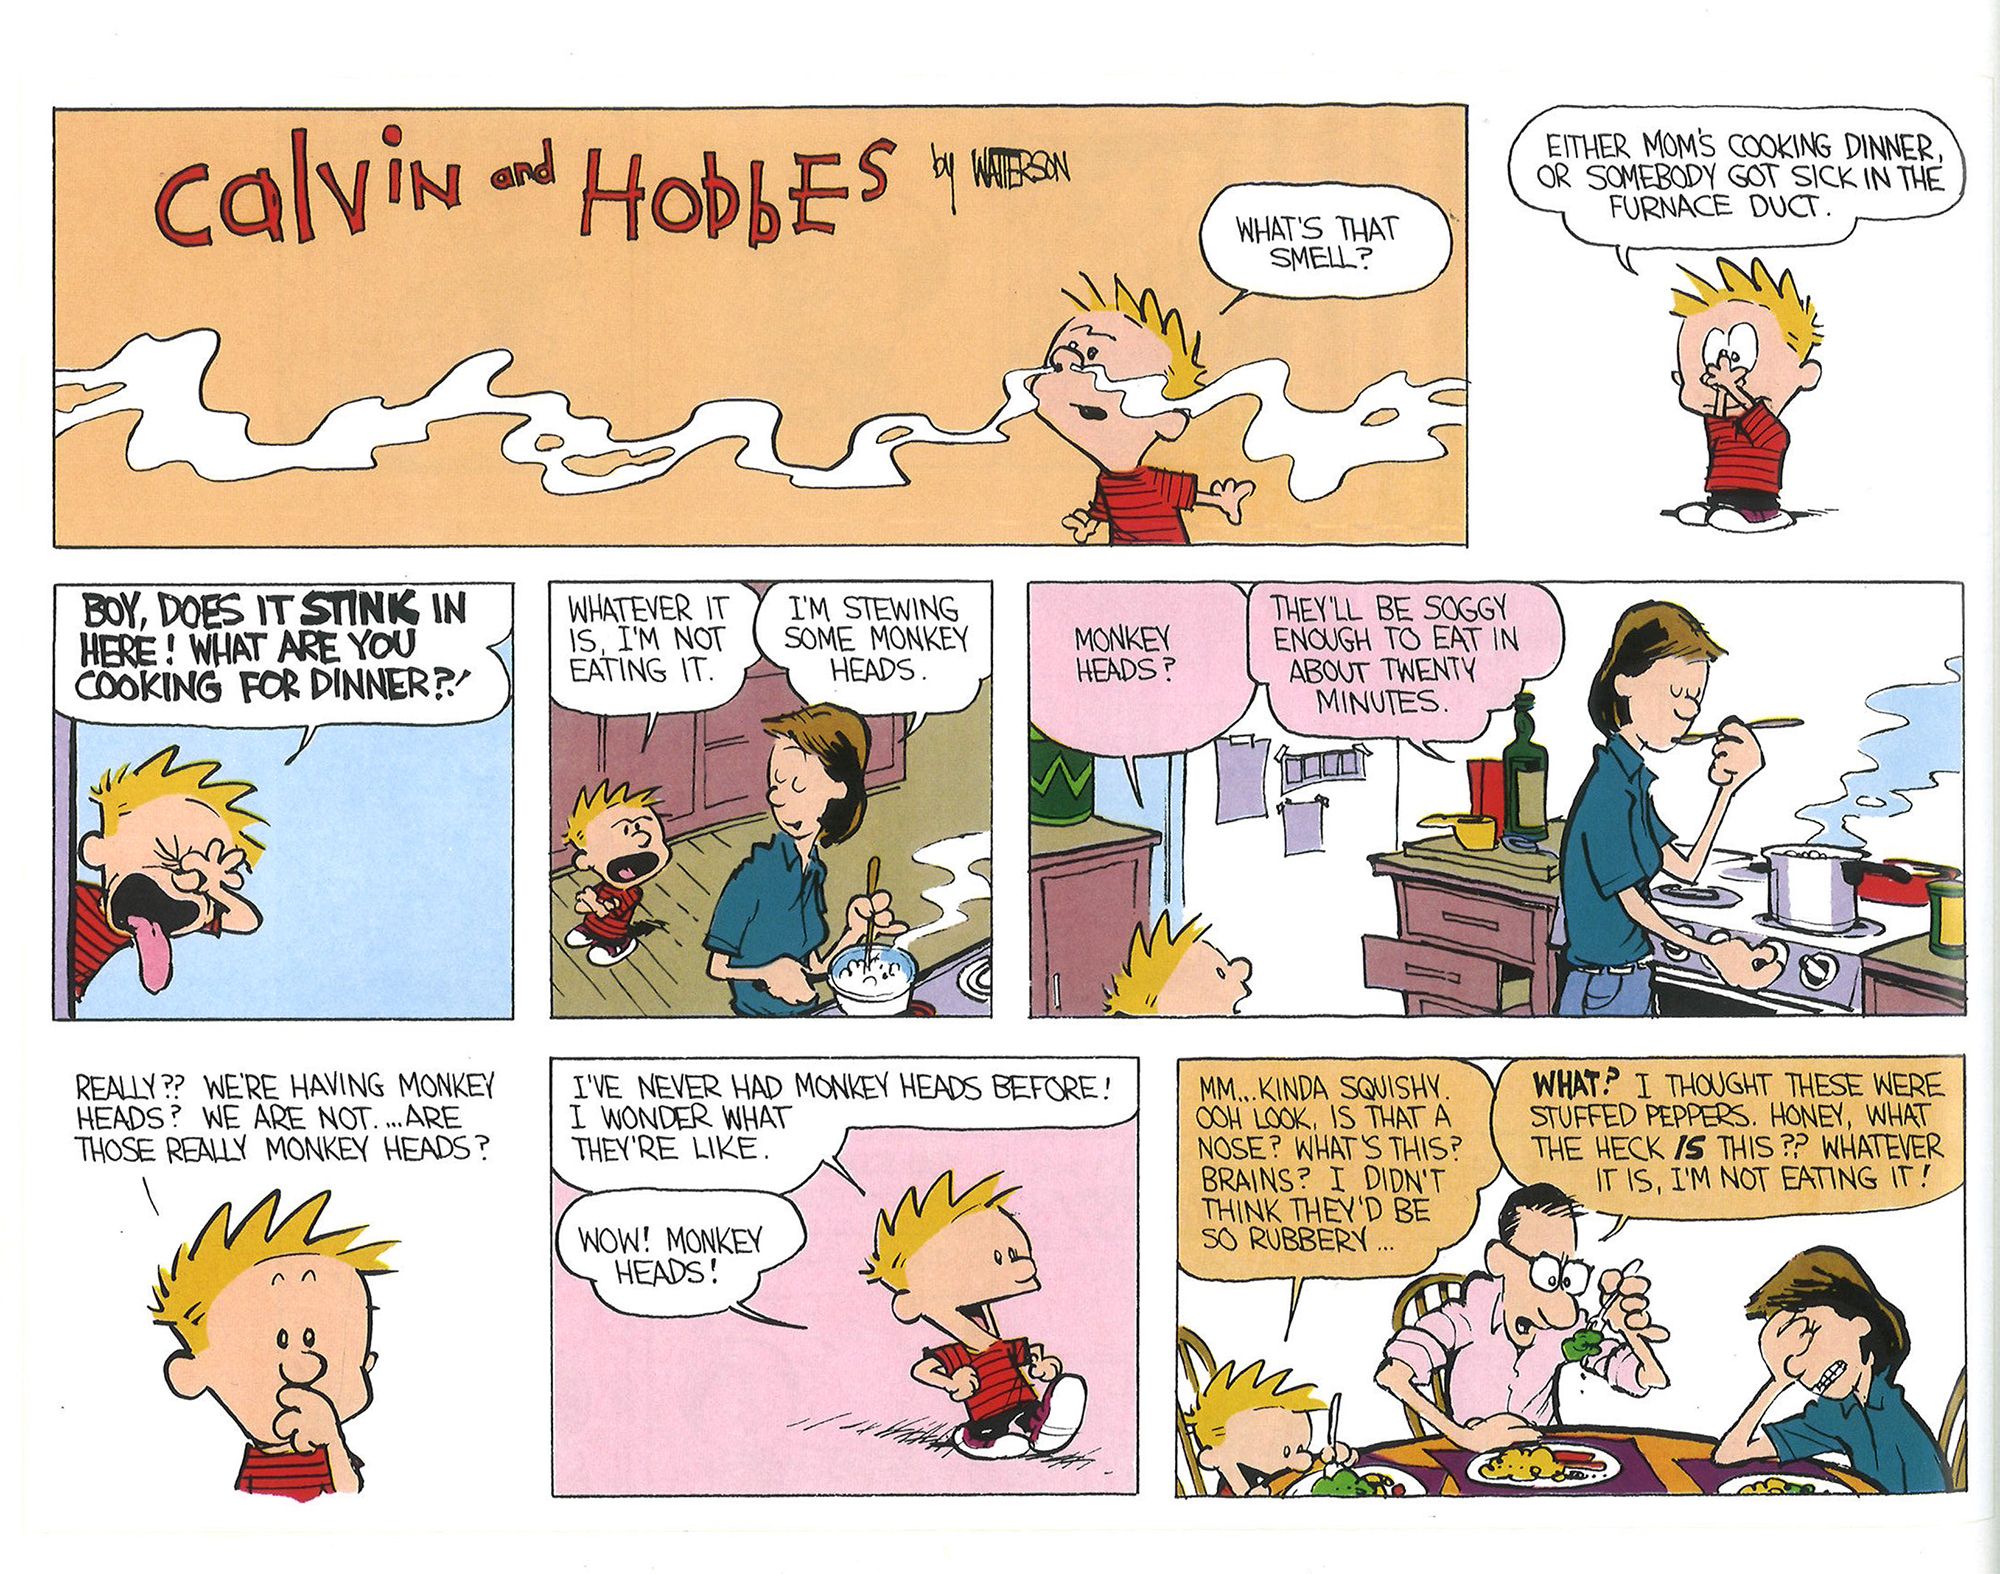 Calvin's mom tricks him into eating dinner by saying she's making monkey brains.